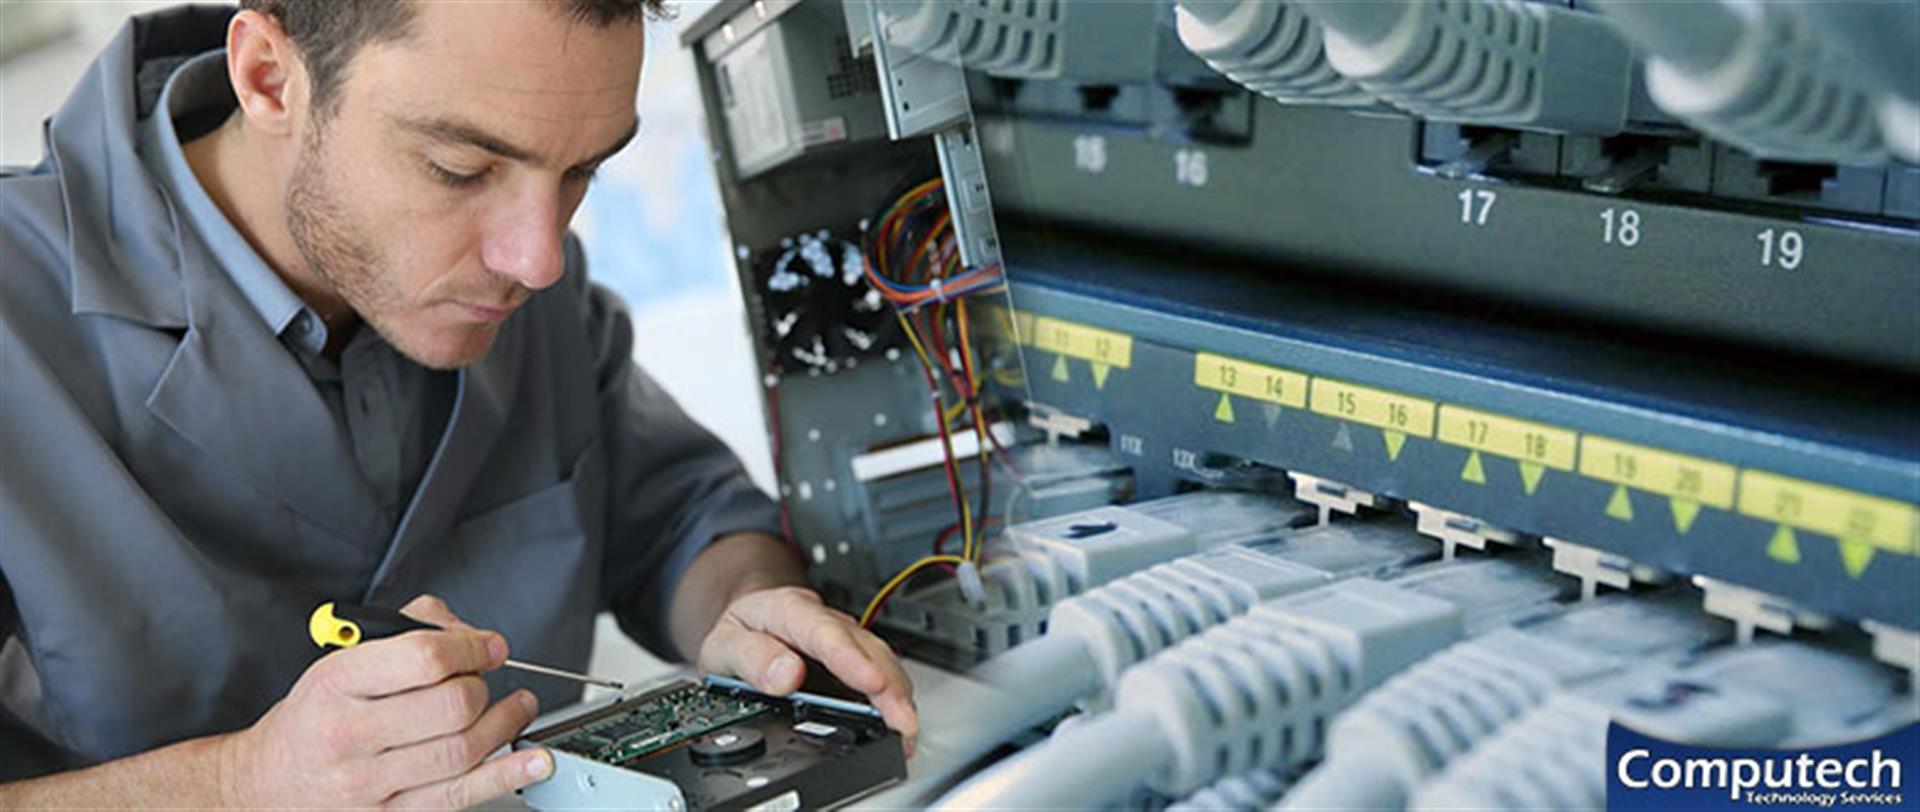 Carrollton Georgia On-Site PC & Printer Repairs, Networking, Voice & Data Cabling Solutions